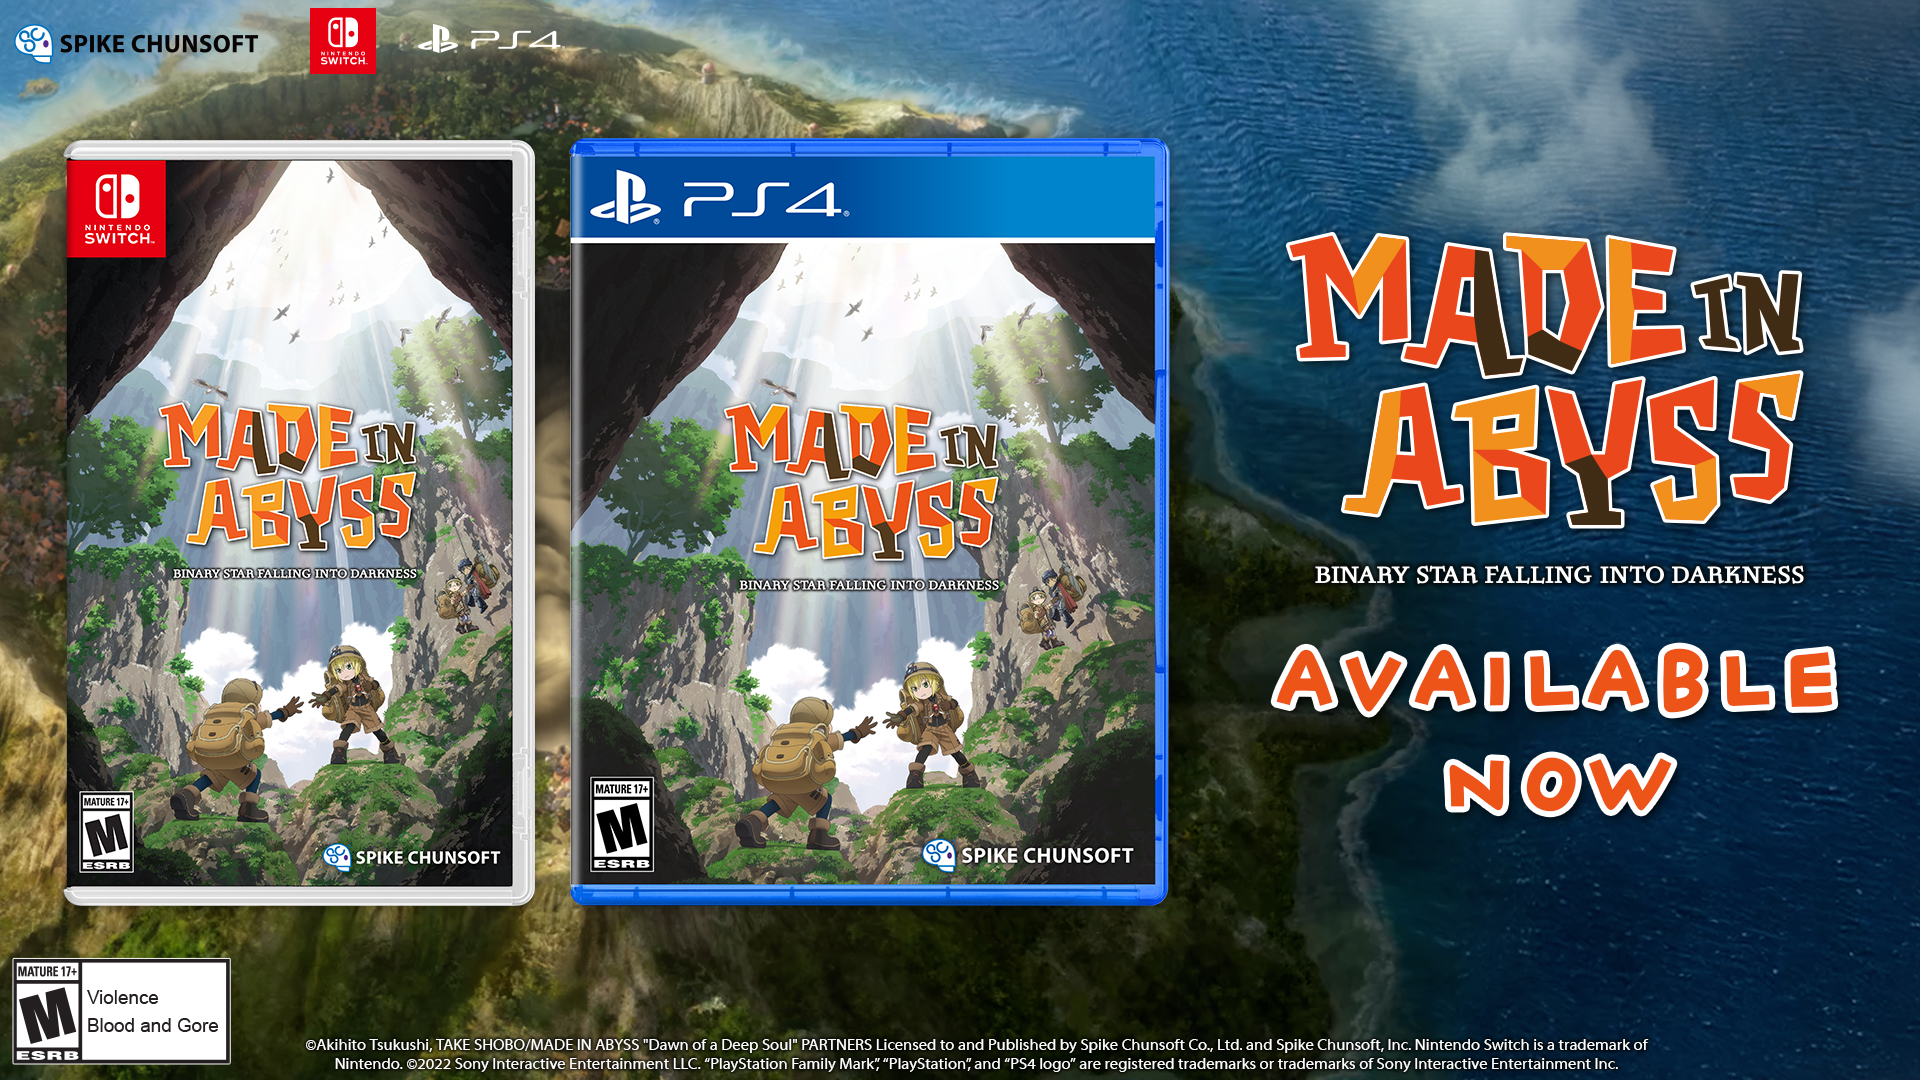 Made in Abyss: Binary Star Falling into Darkness - Numskull Games